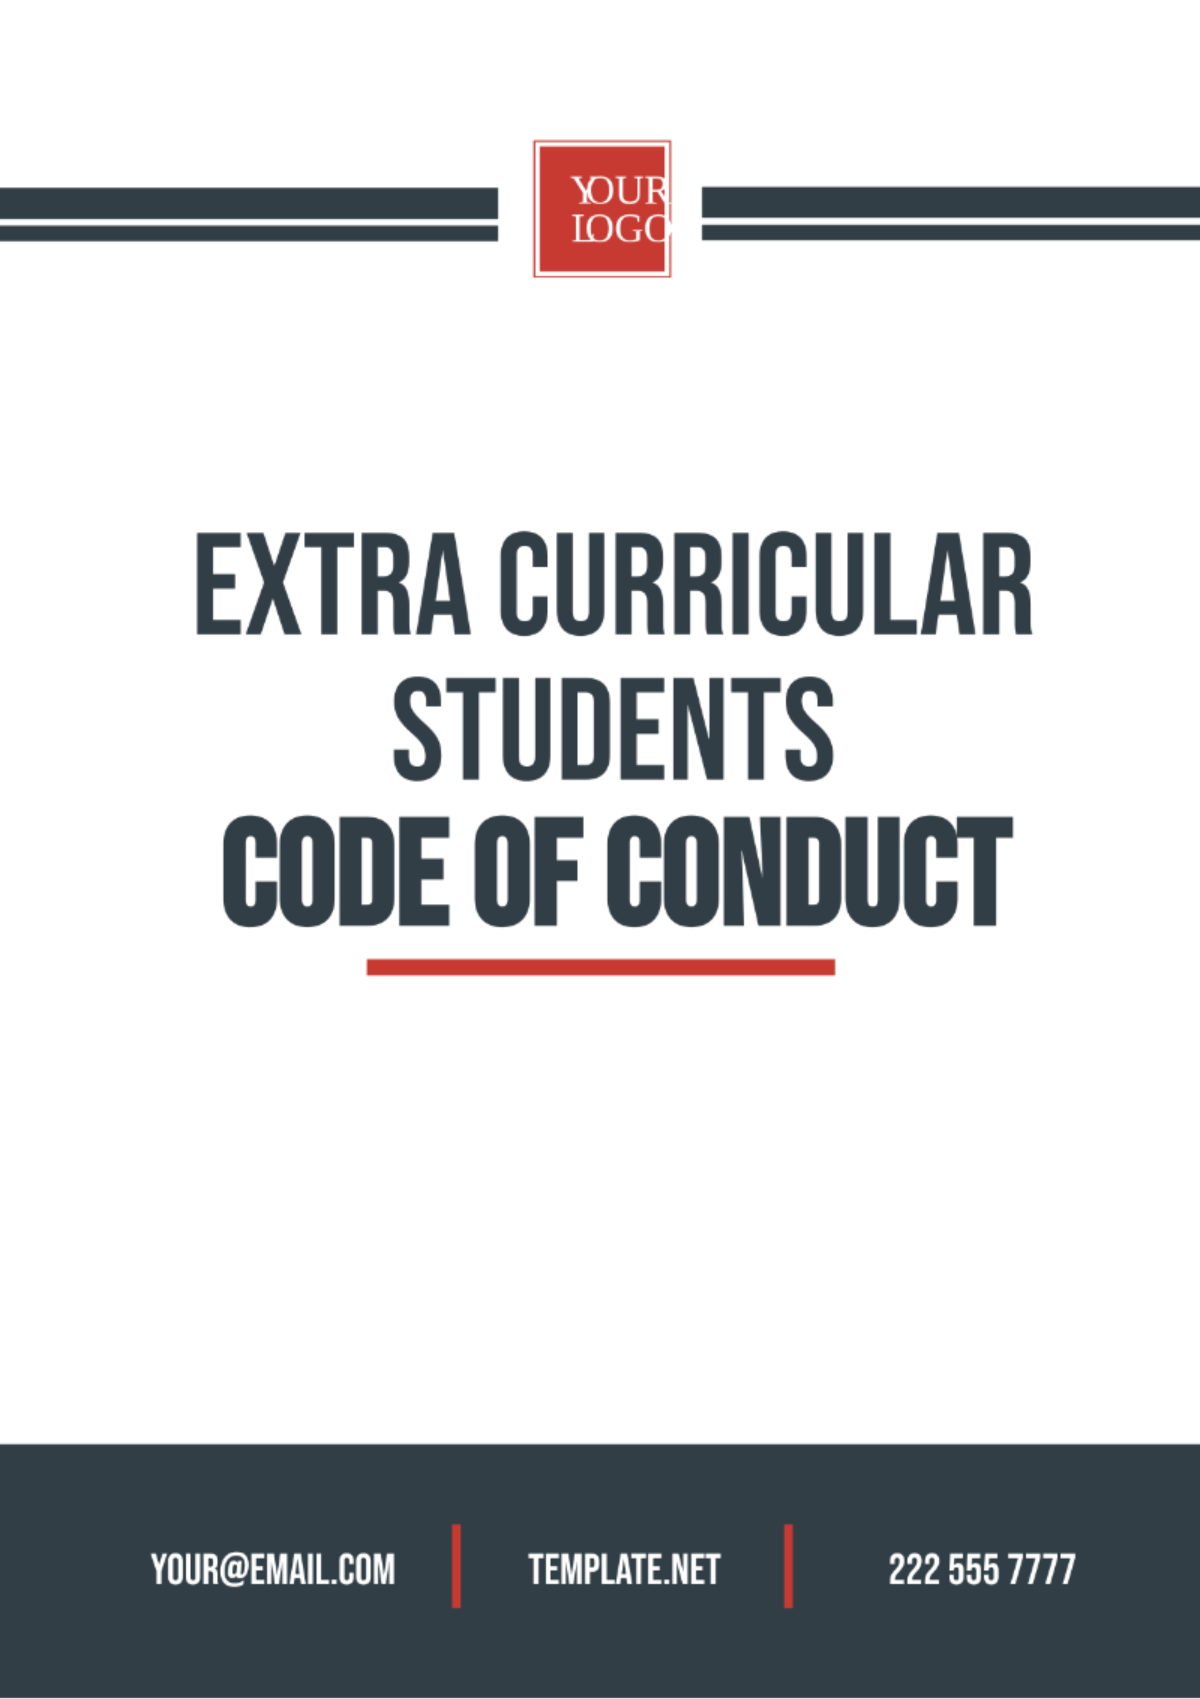 Extra Curricular Student Code of Conduct Template